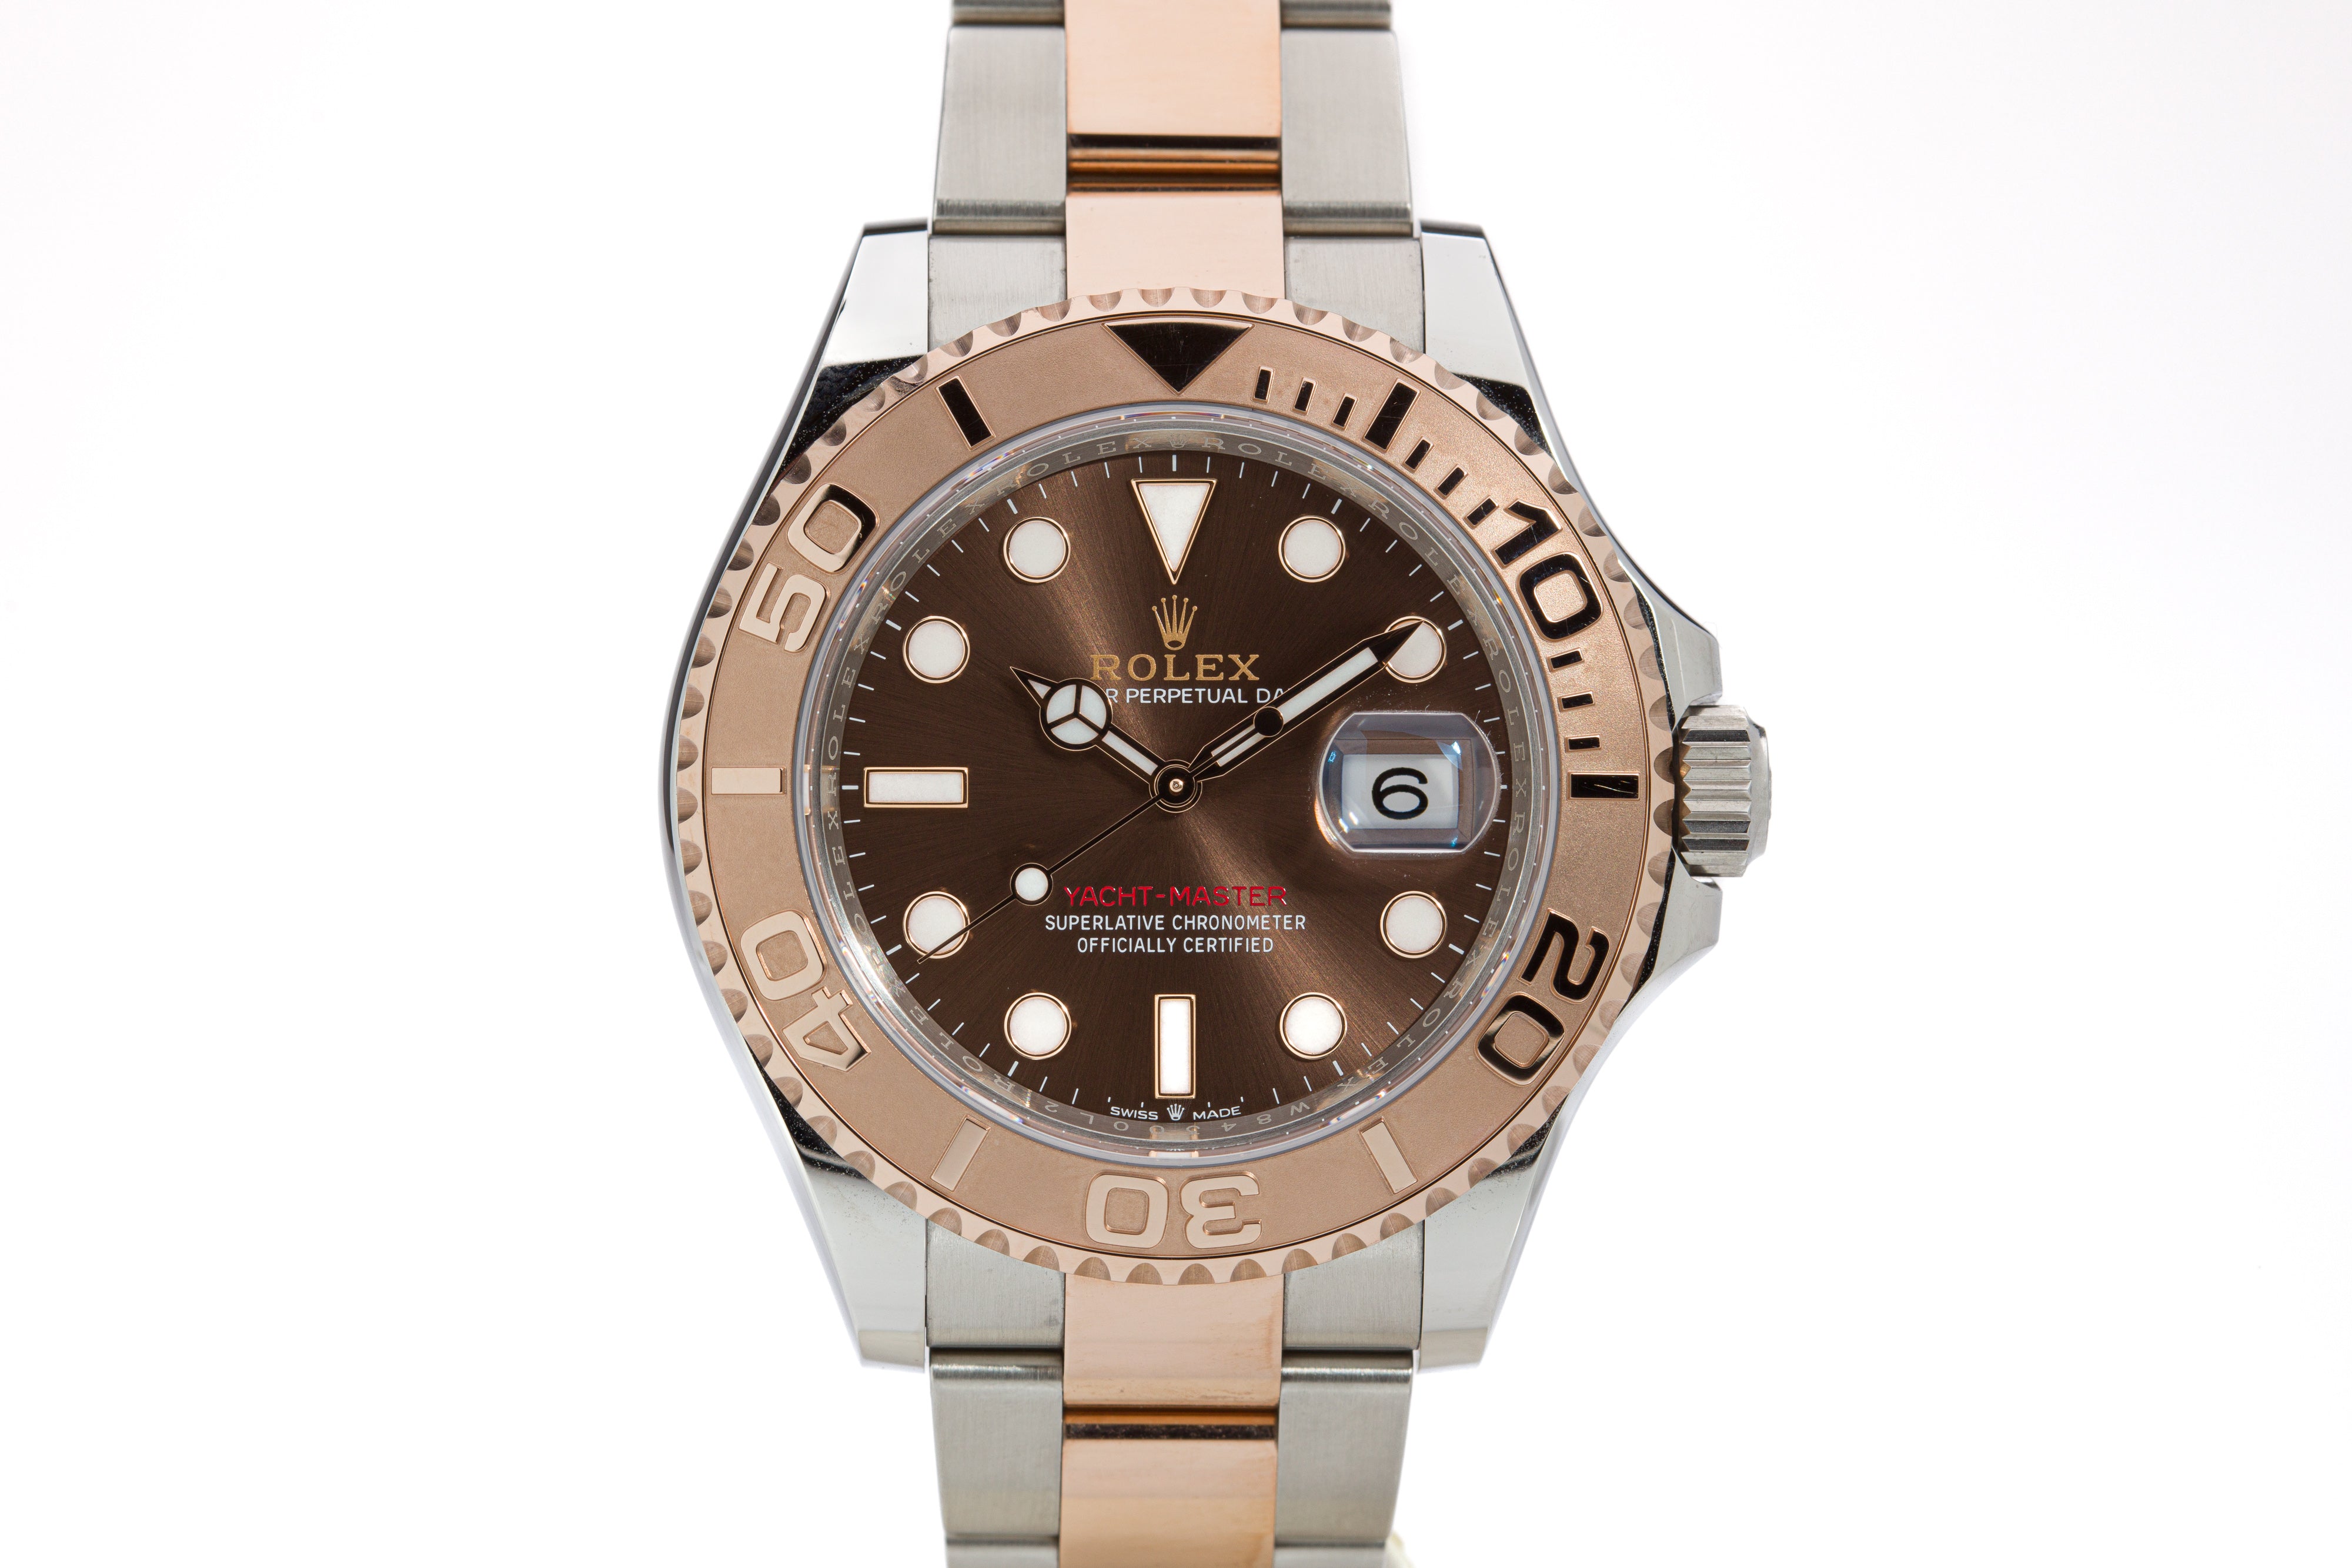 Rolex Yacht-Master 126621 Stainless Steel & Rose Gold Watch